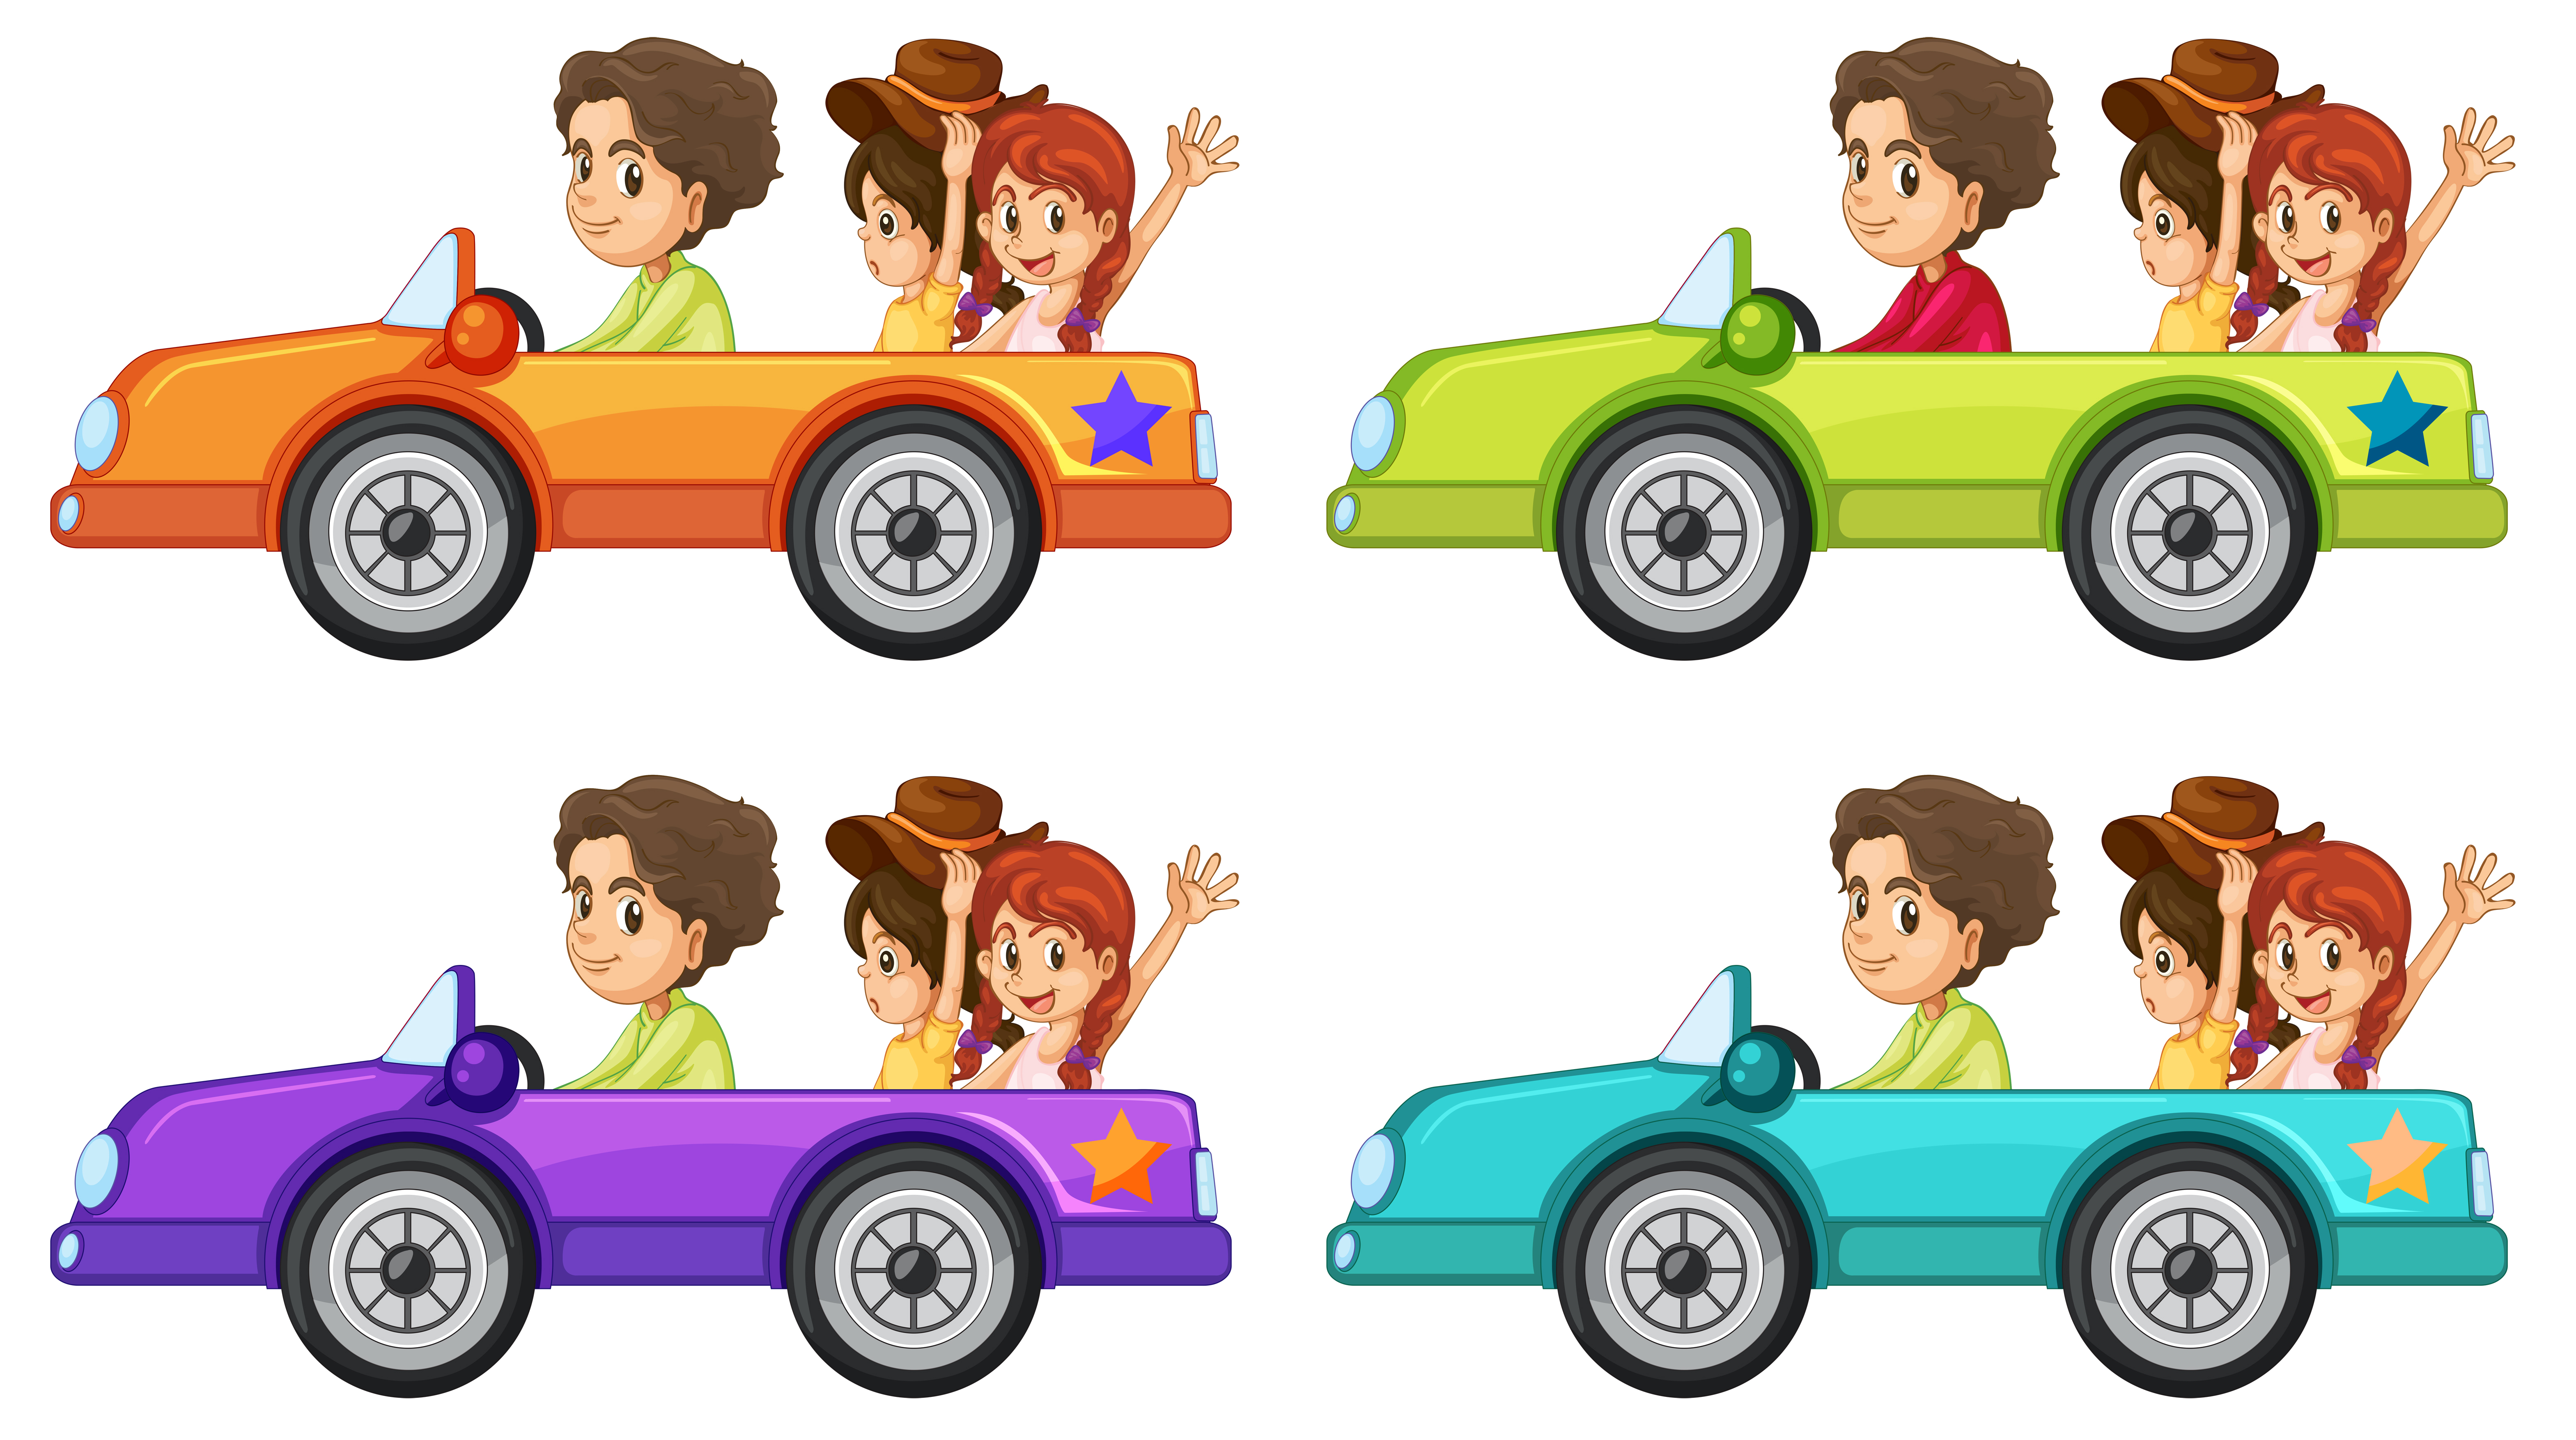 Browse 3,455 incredible Car Ride vectors, icons, clipart graphics, and back...